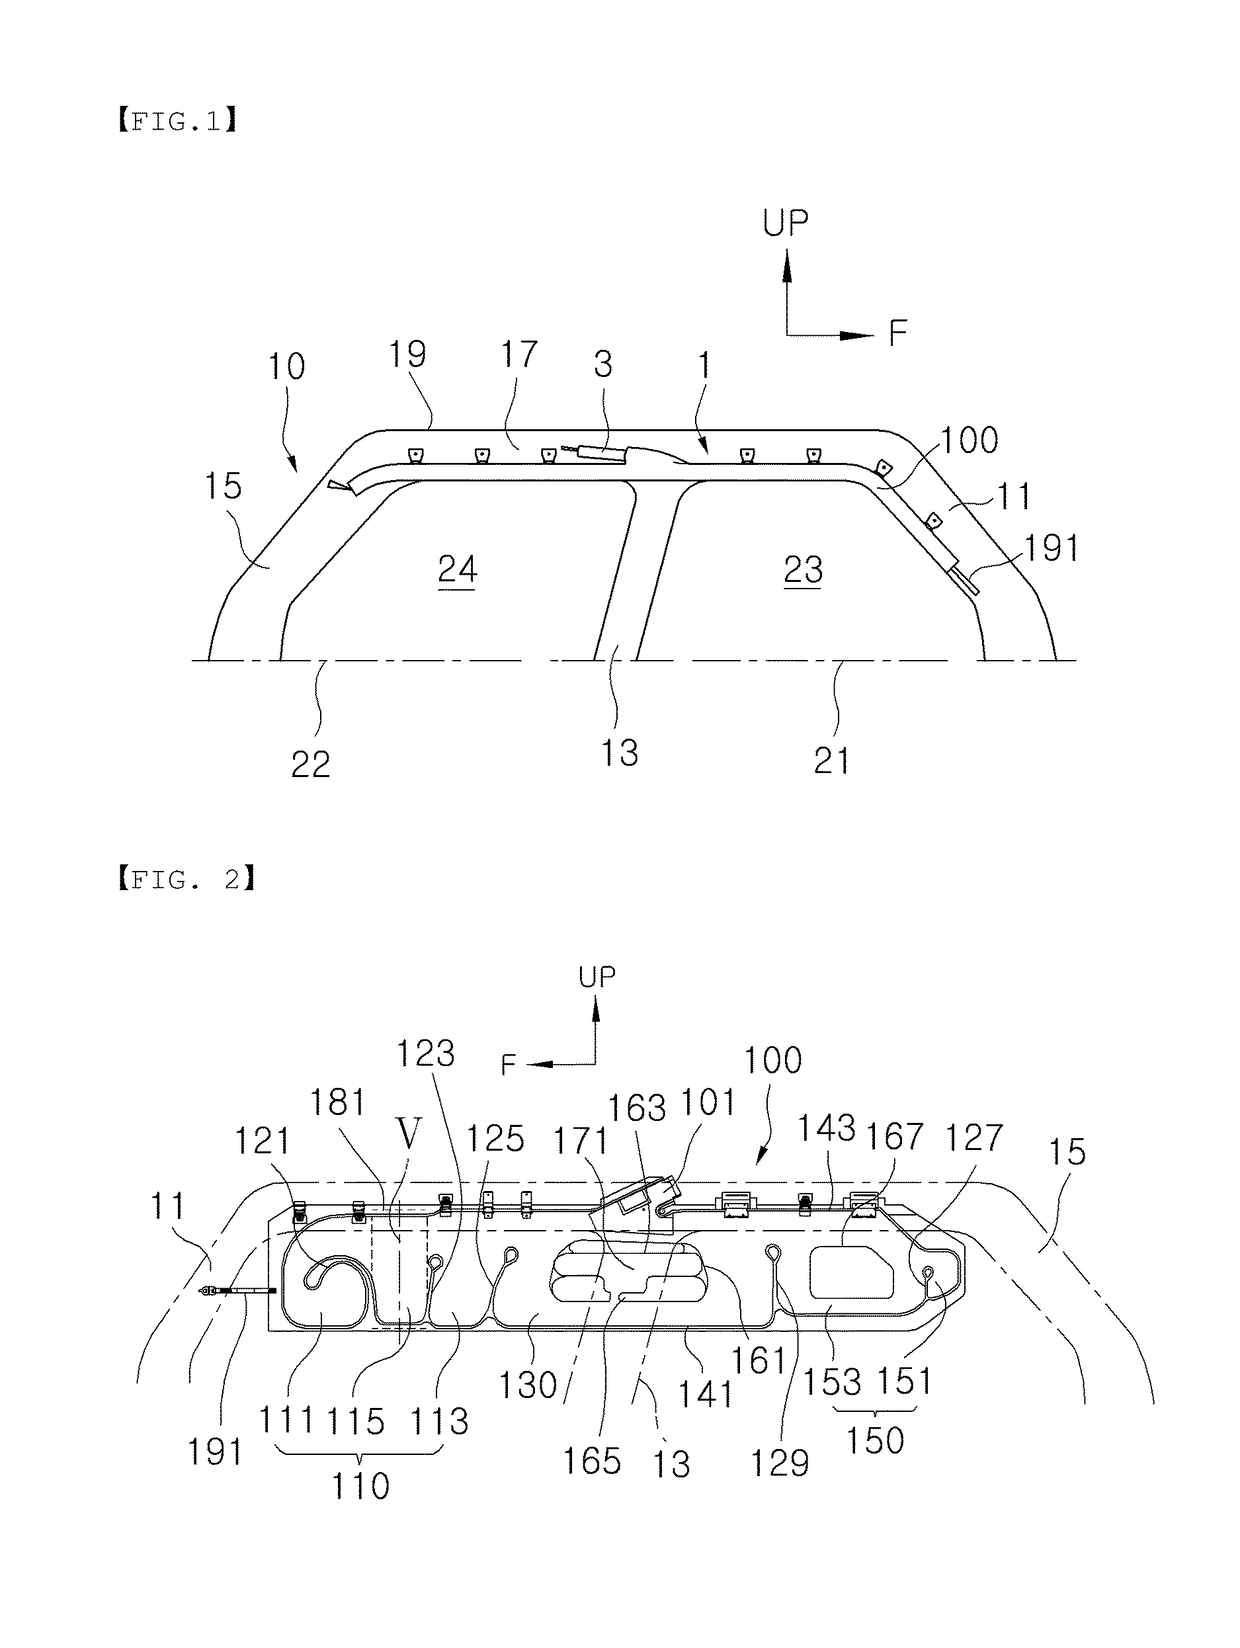 Side curtain airbag for vehicle